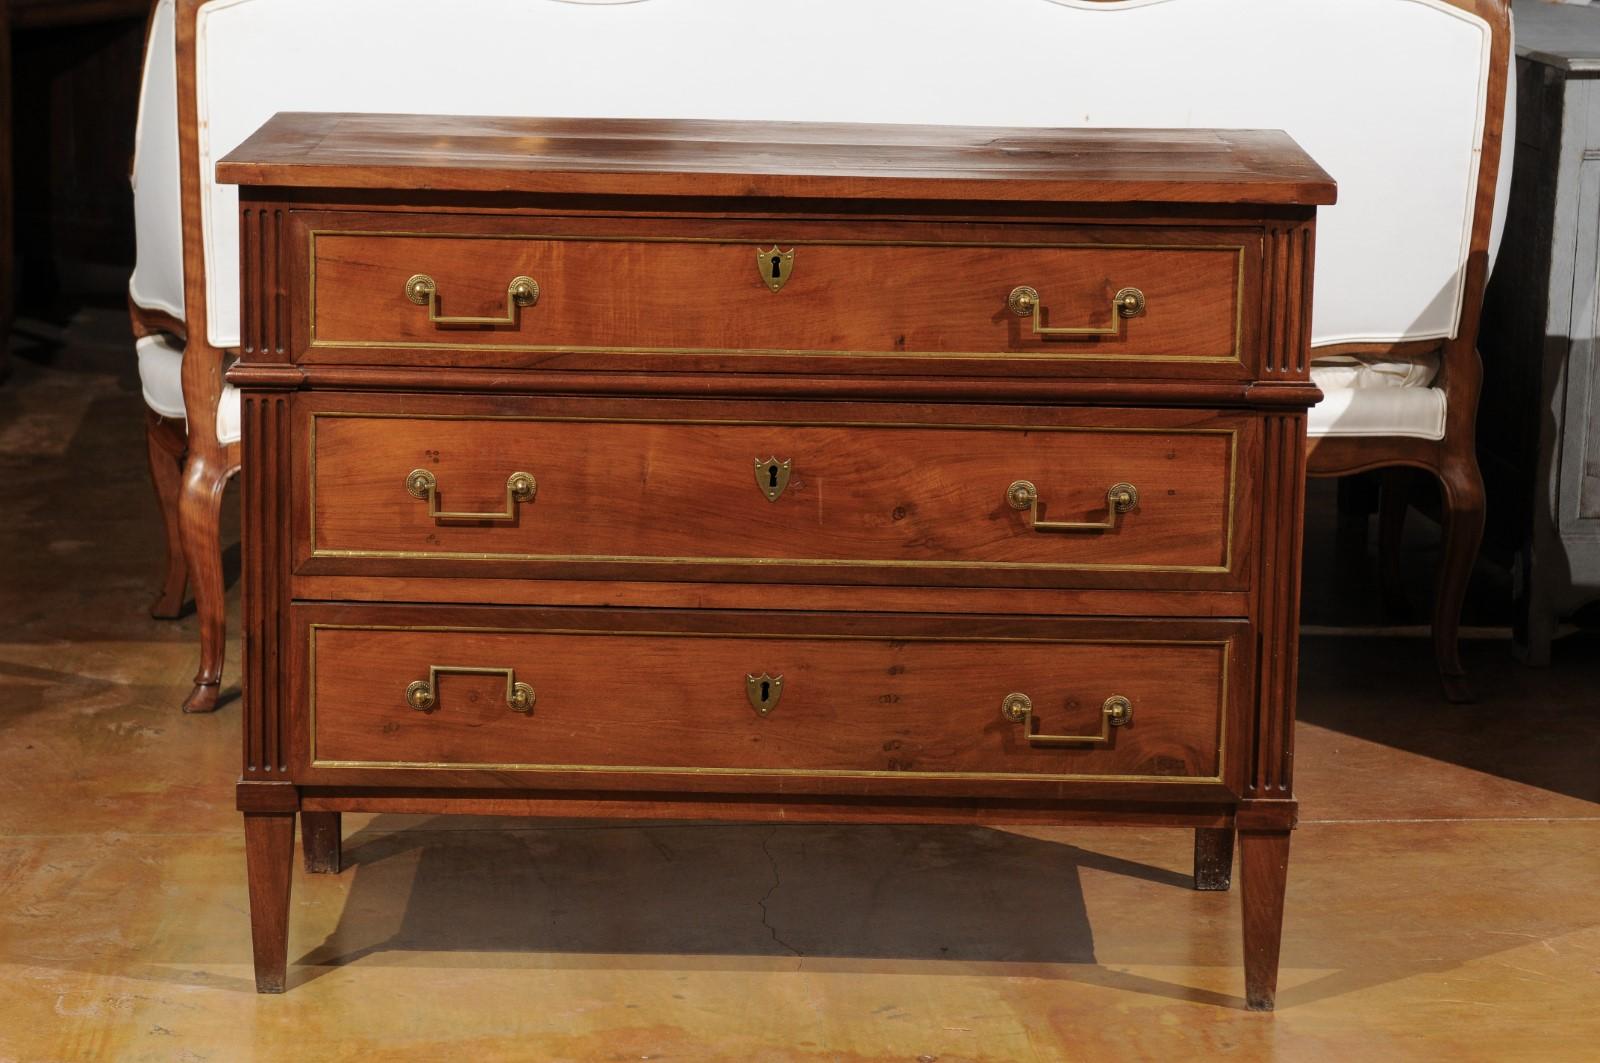 A French Louis XVI style walnut three-drawer commode from the first half of the 19th century with brass accents and fluted motifs. This French walnut commode features a rectangular top sitting above three graduated drawers. Each drawer is dovetailed